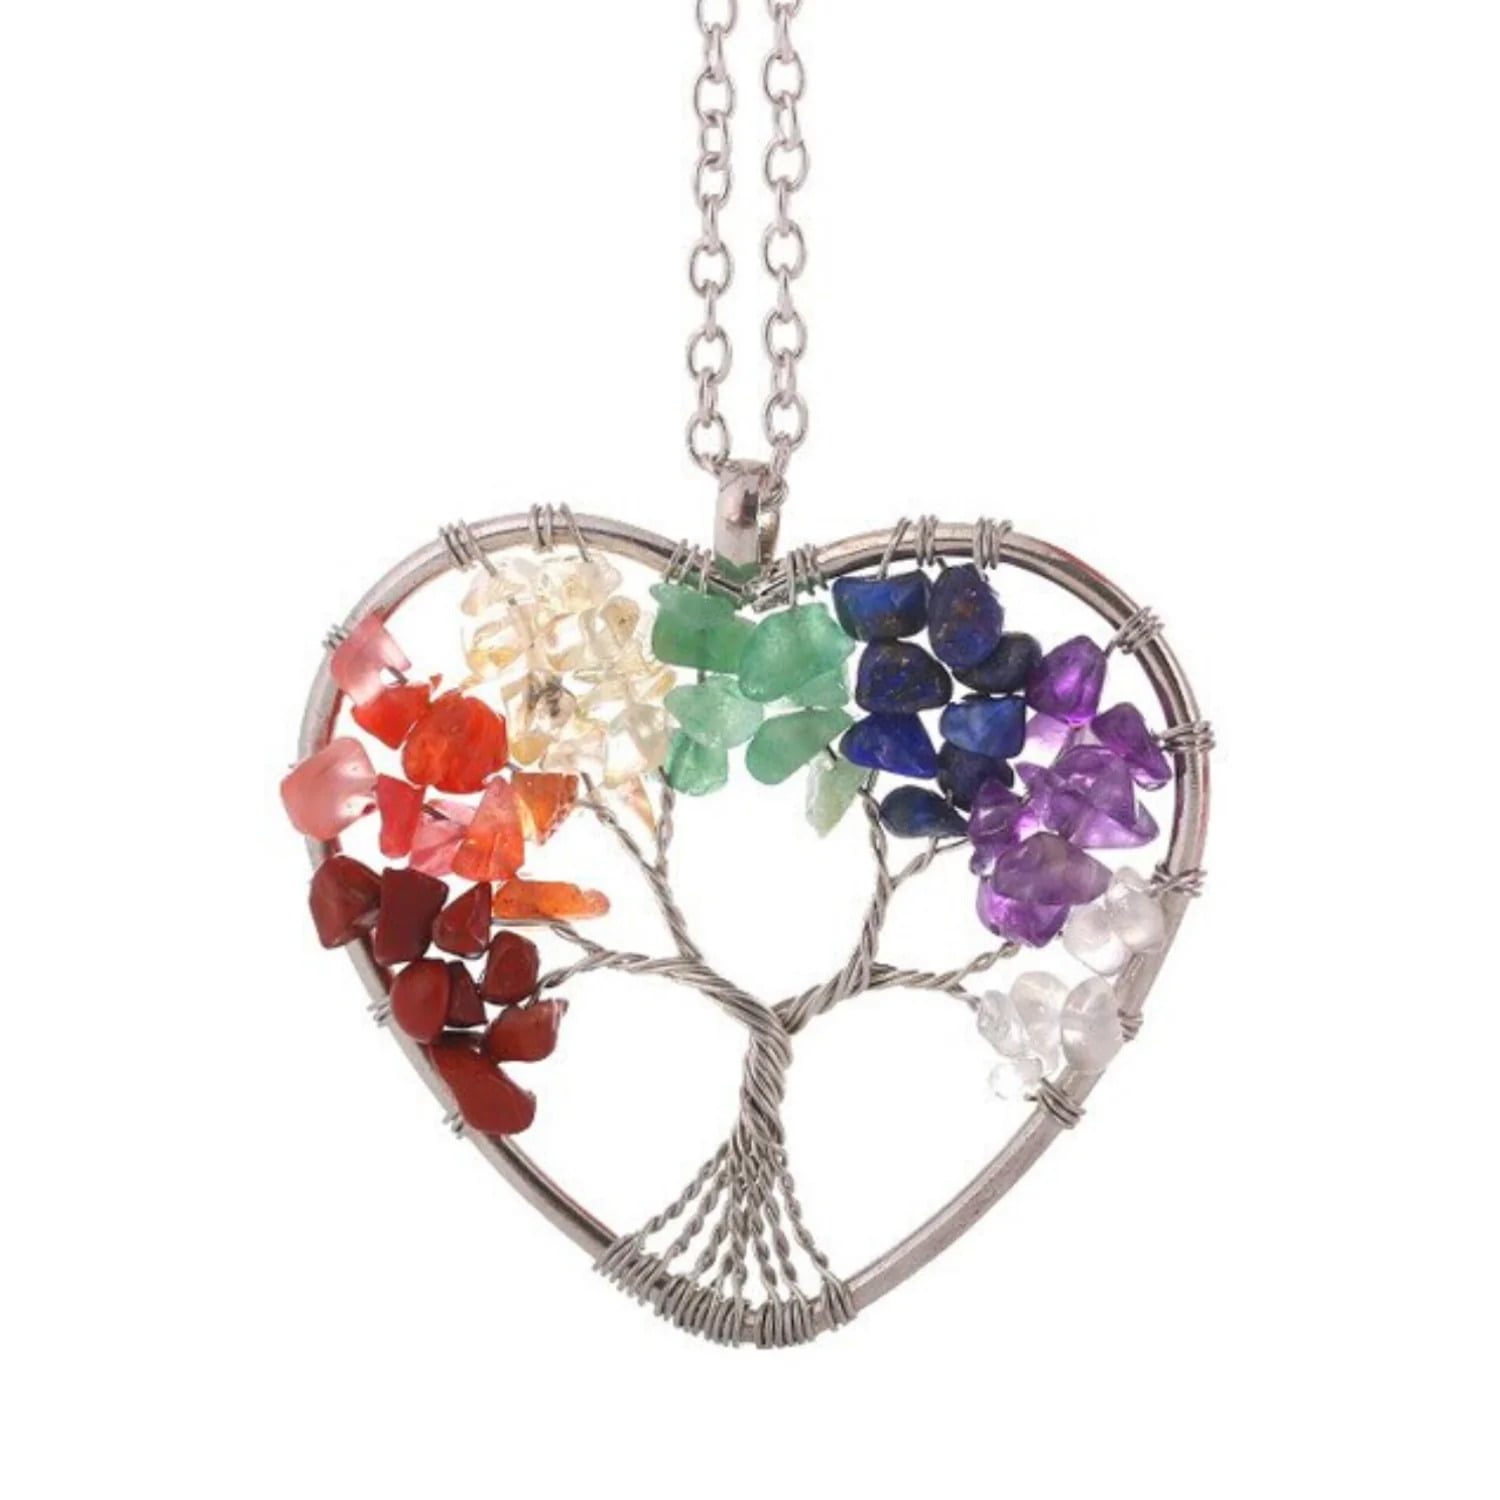 PESOENTH 7 Chakra Tree Of Life Healing Crystals Gemstones Pendant Necklace  Natural Stone Rainbow Quartz Silver Wire Wrapped Necklace Jewelry for Women  Girls Gifts : Buy Online at Best Price in KSA -